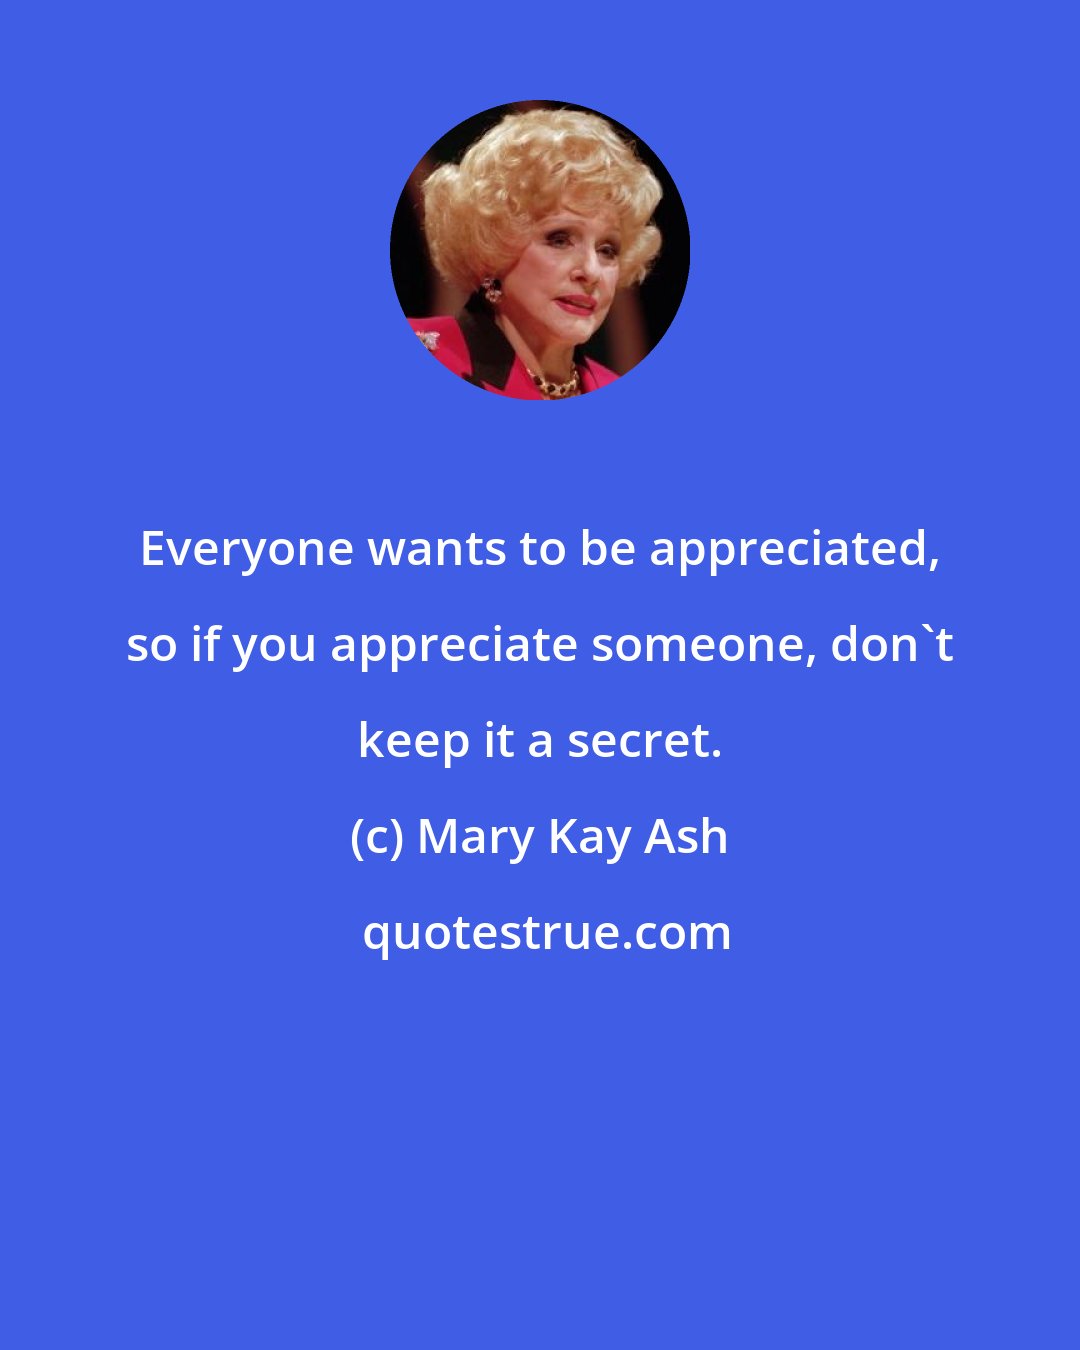 Mary Kay Ash: Everyone wants to be appreciated, so if you appreciate someone, don't keep it a secret.